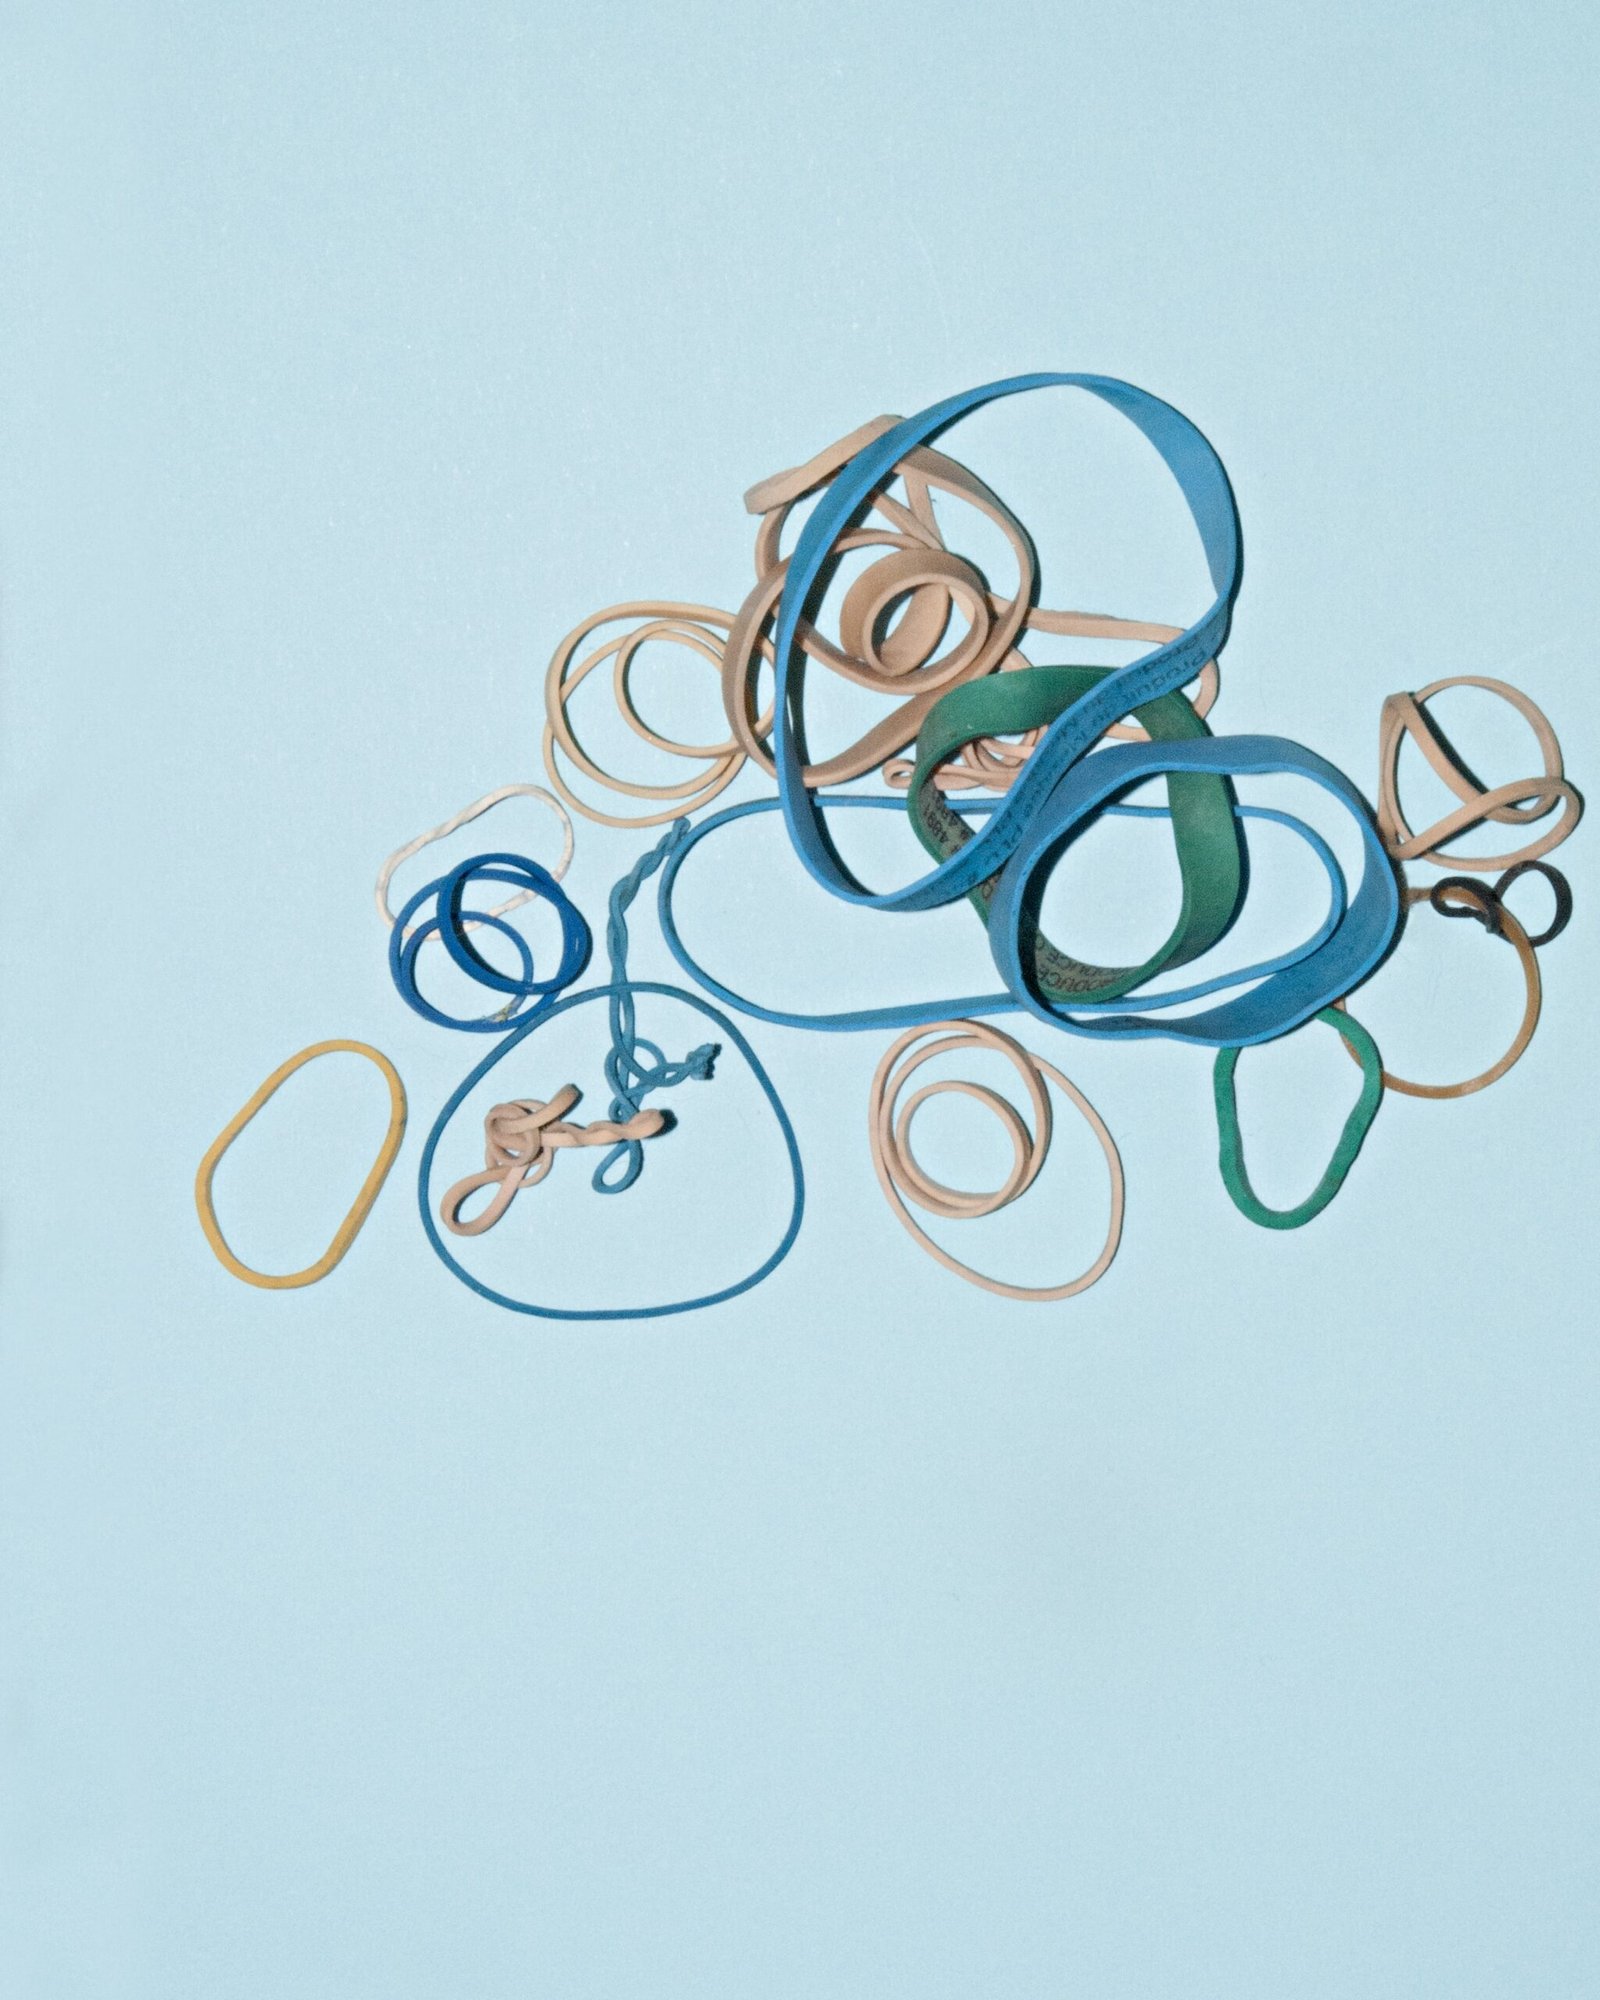 You are currently viewing The Process of Rubber Manufacturing: A Closer Look into the World of Rubber Bands